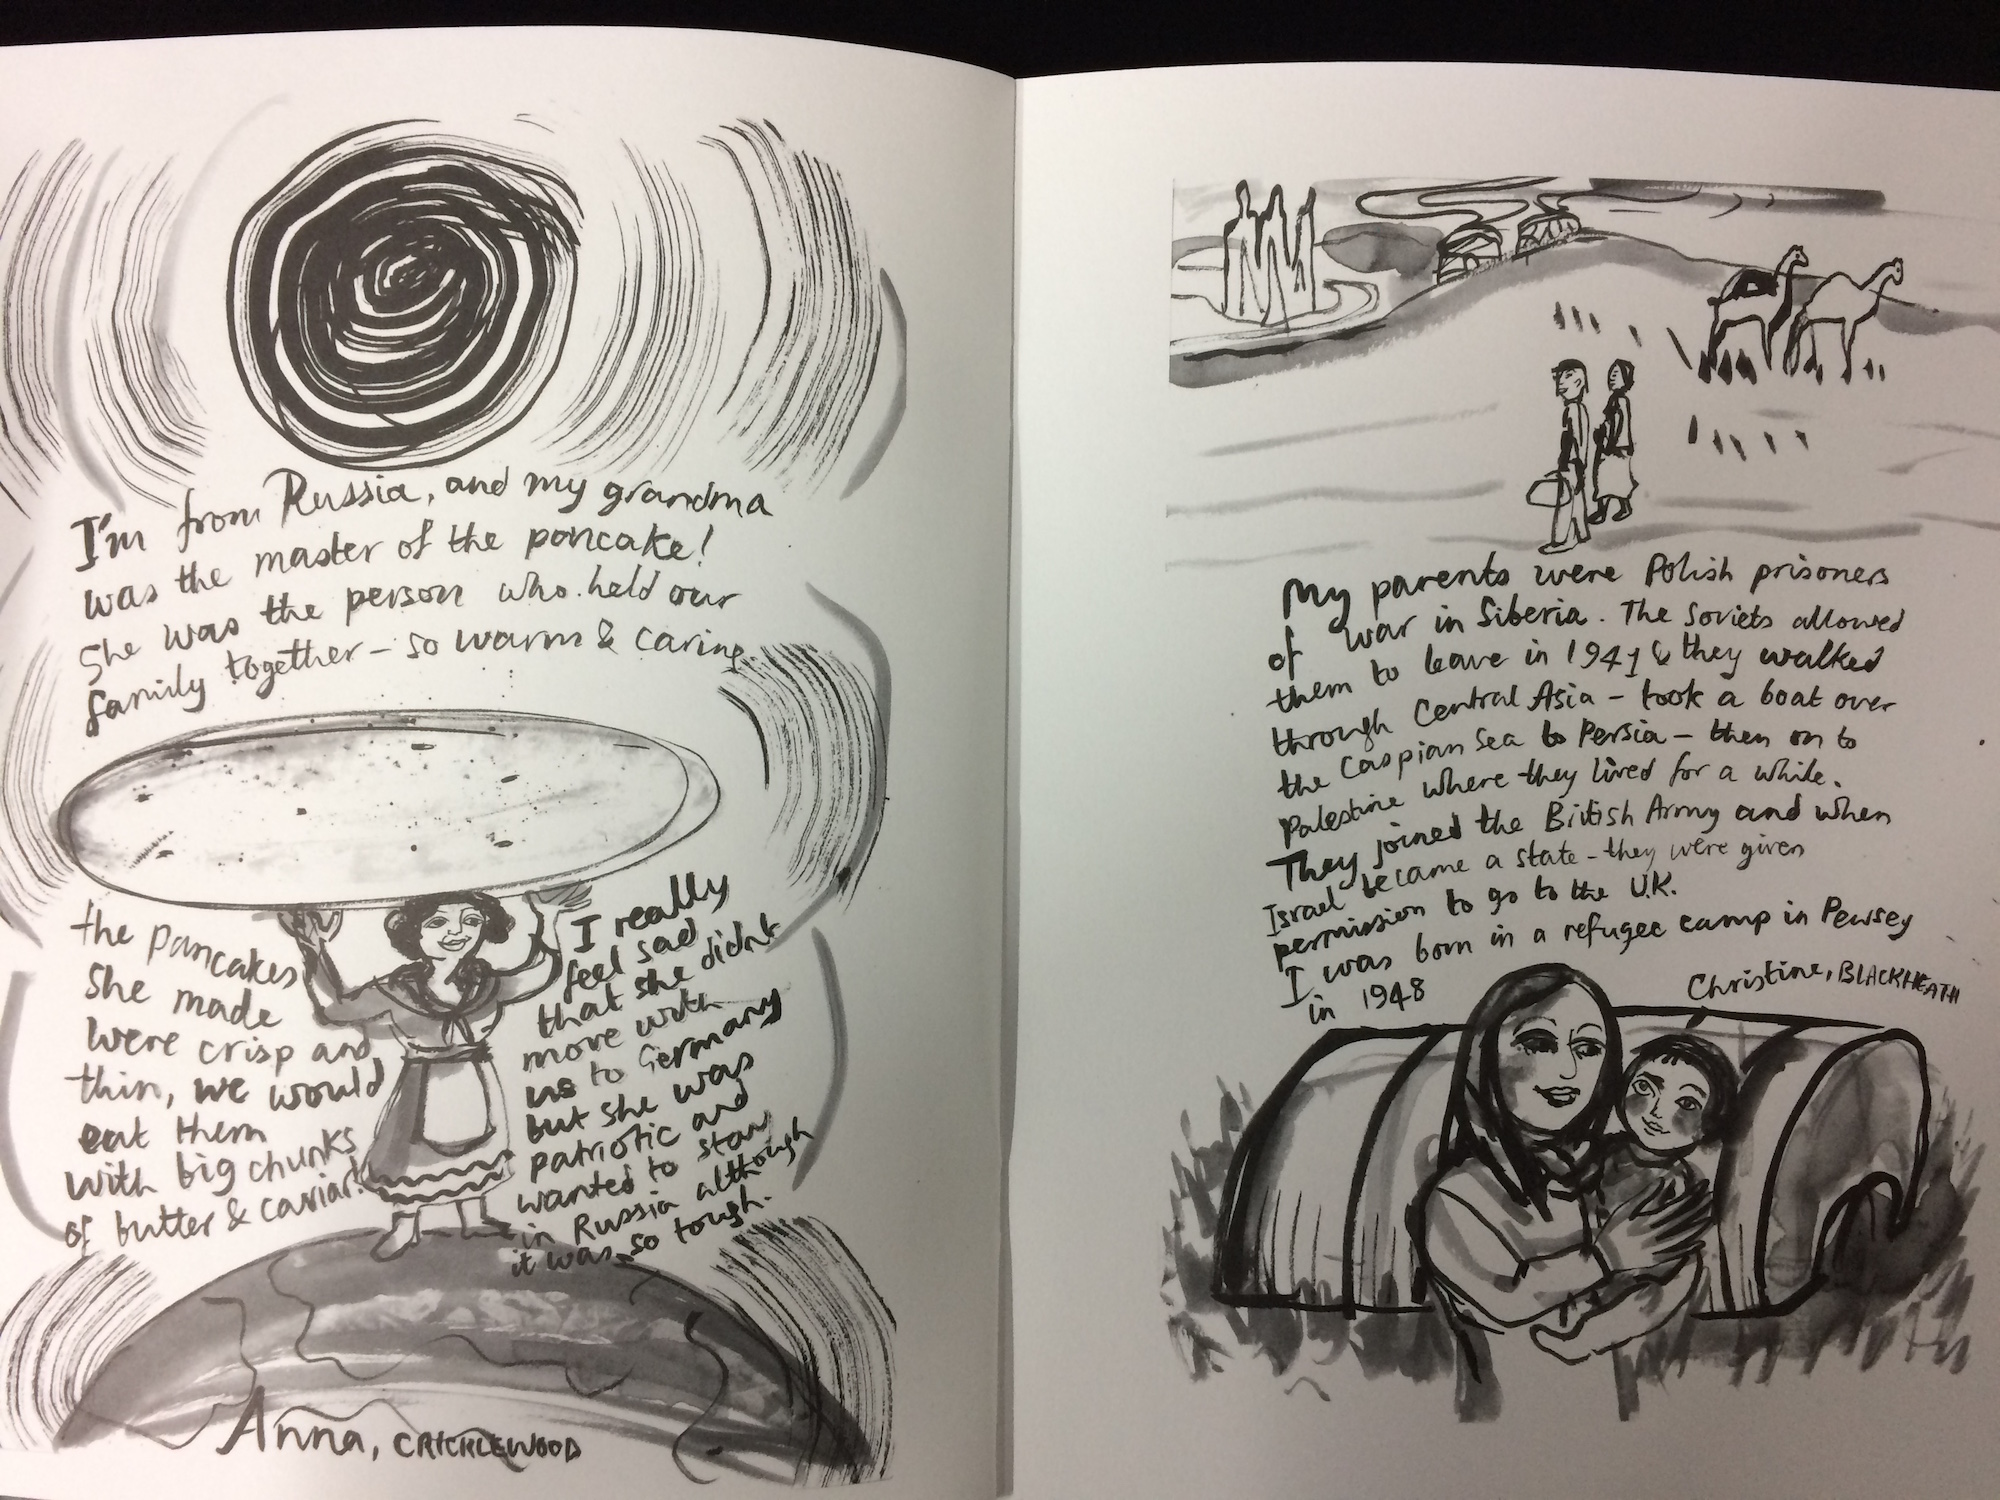 Voyage book of migration stories